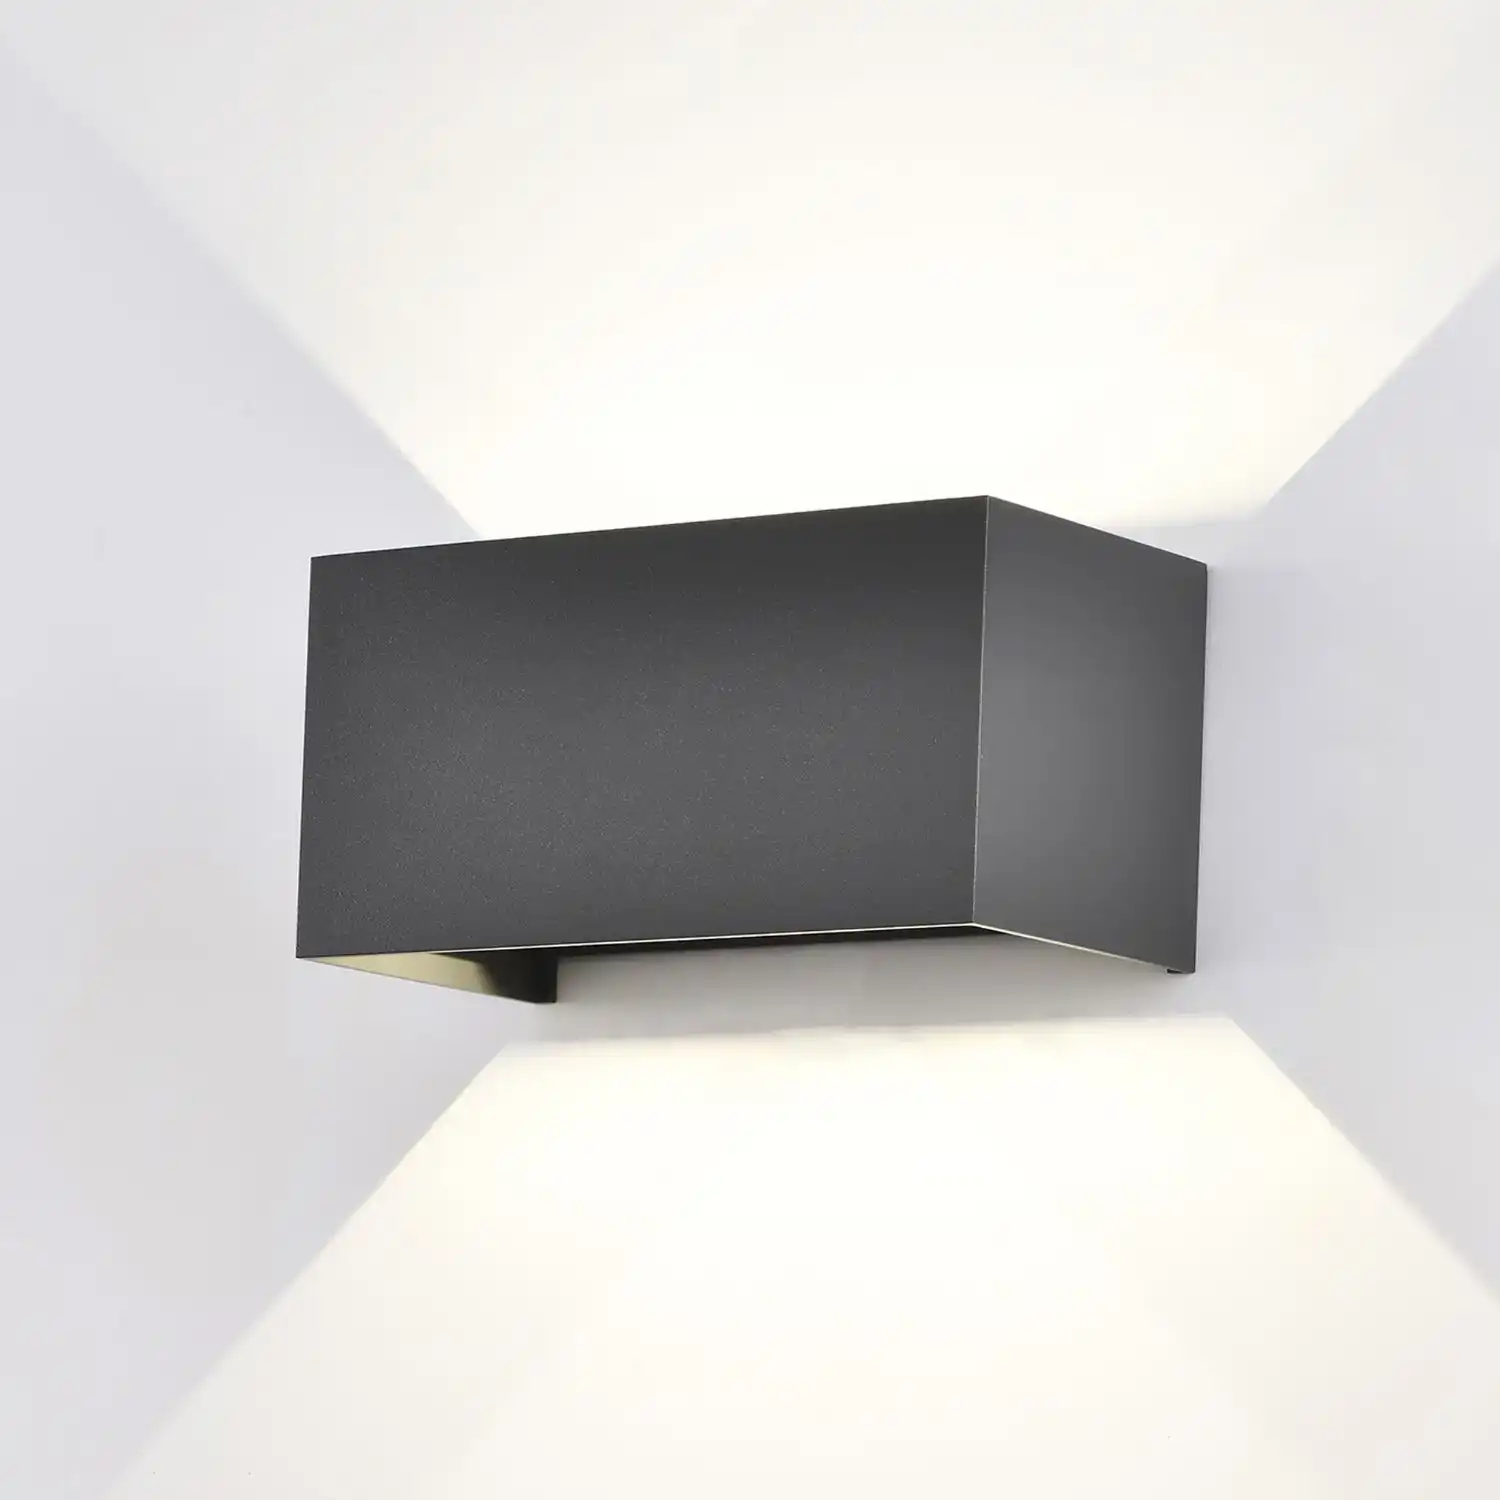 Davos Rectangle Wall Lamp, 4 x 6W LED, 4000K, 2200lm, IP54, Anthracite, 3yrs Warranty